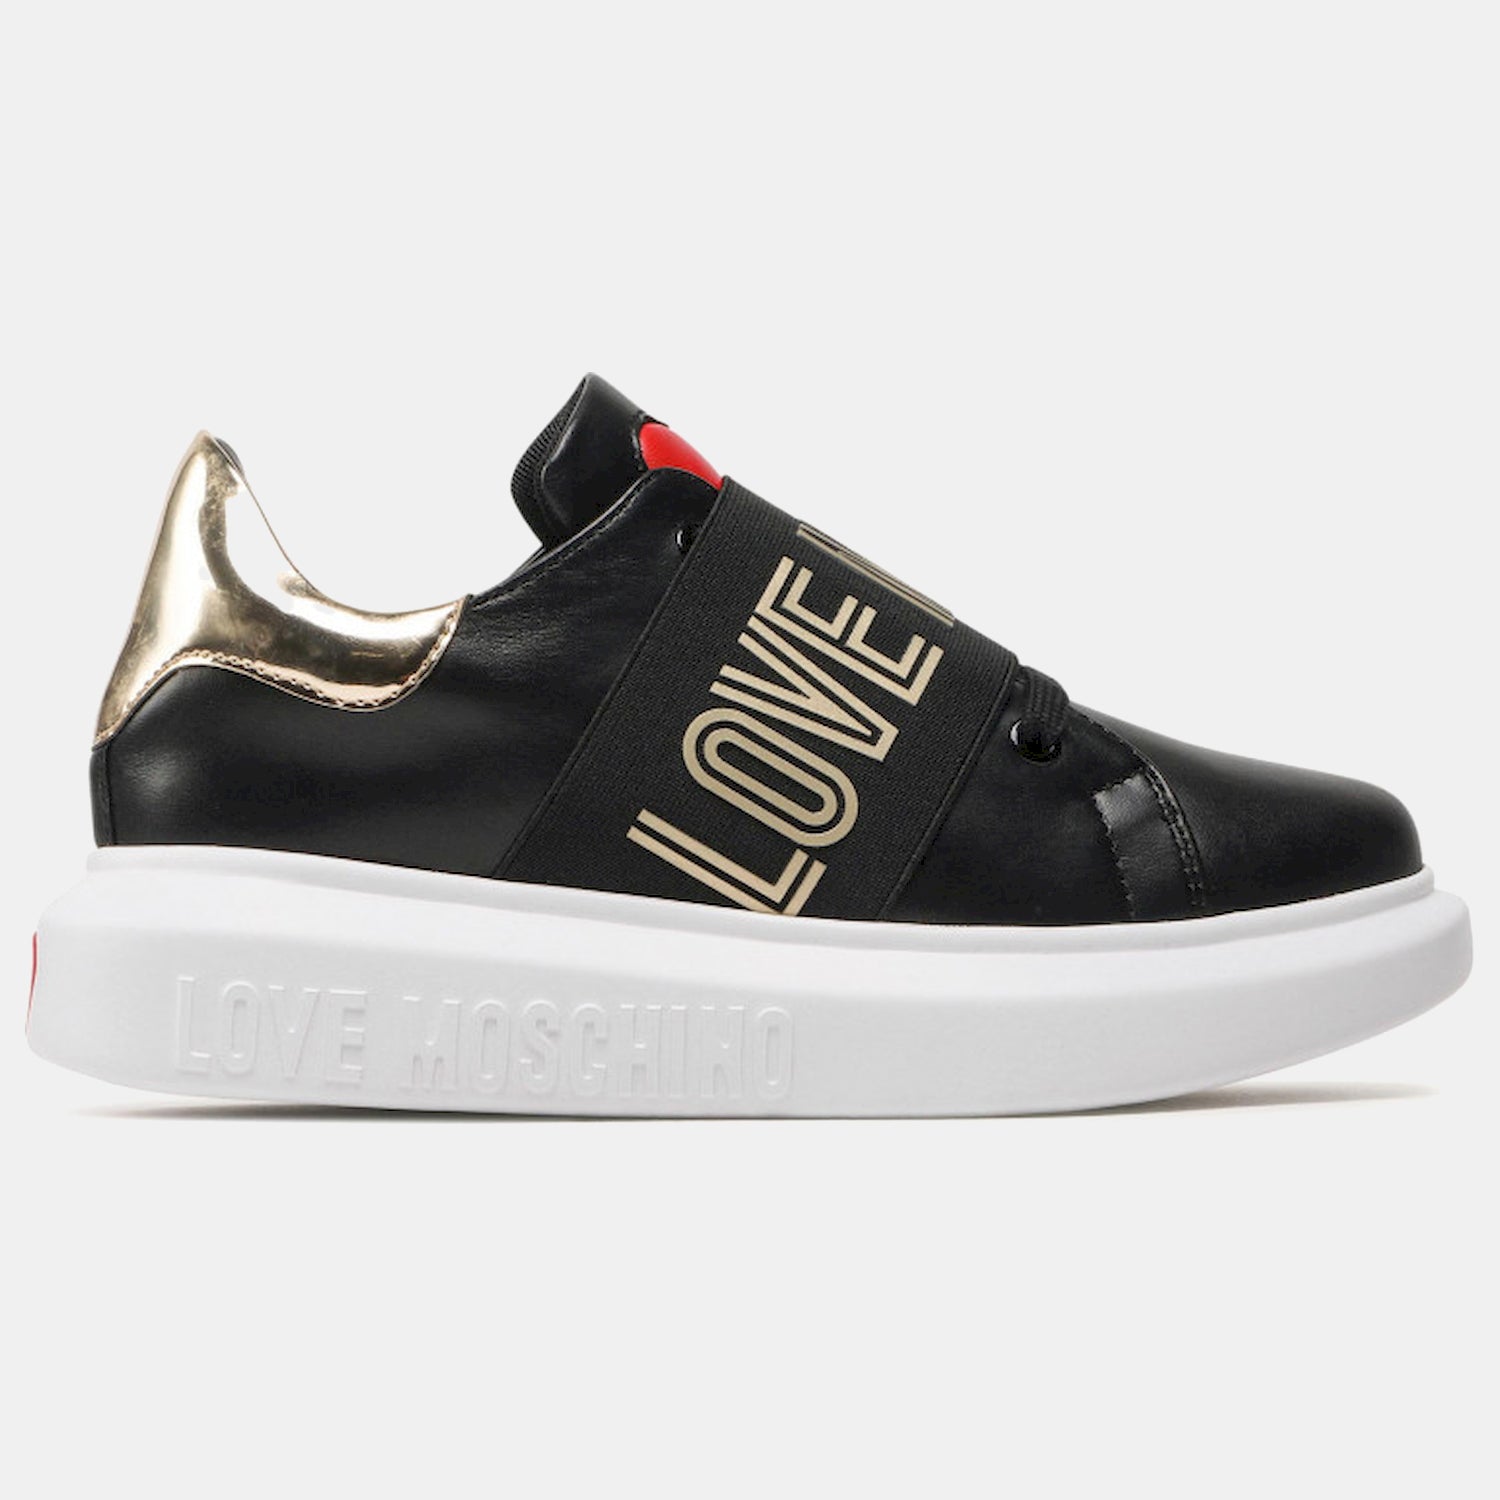 Moschino Sapatilhas Sneakers Shoes Ja15104 Blk Gold Preto Ouro_shot2